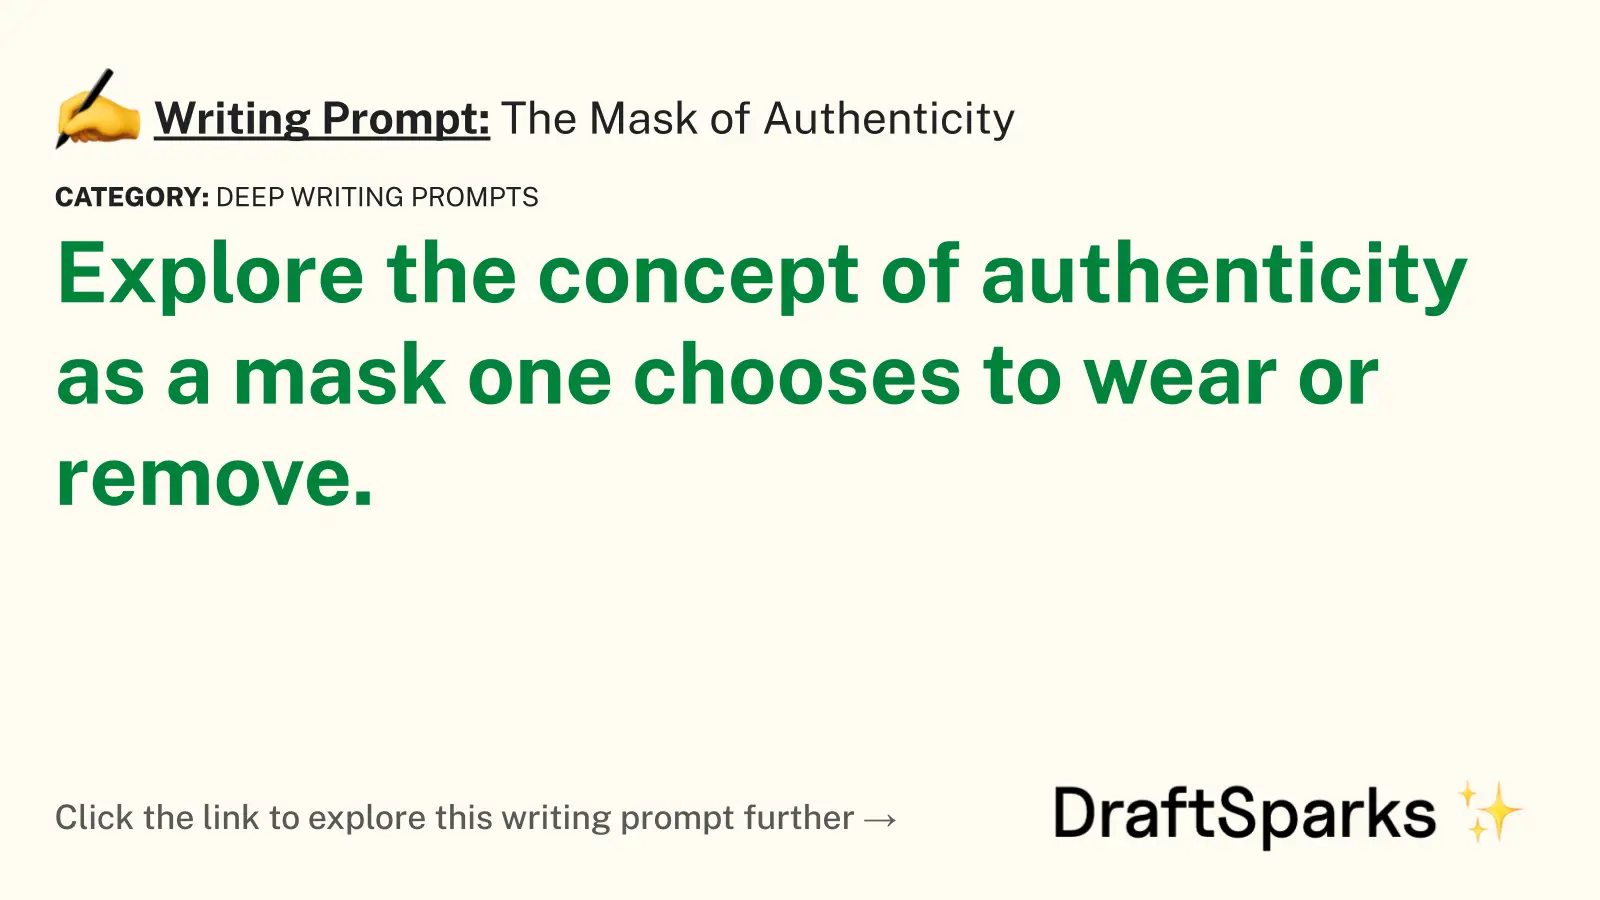 The Mask of Authenticity